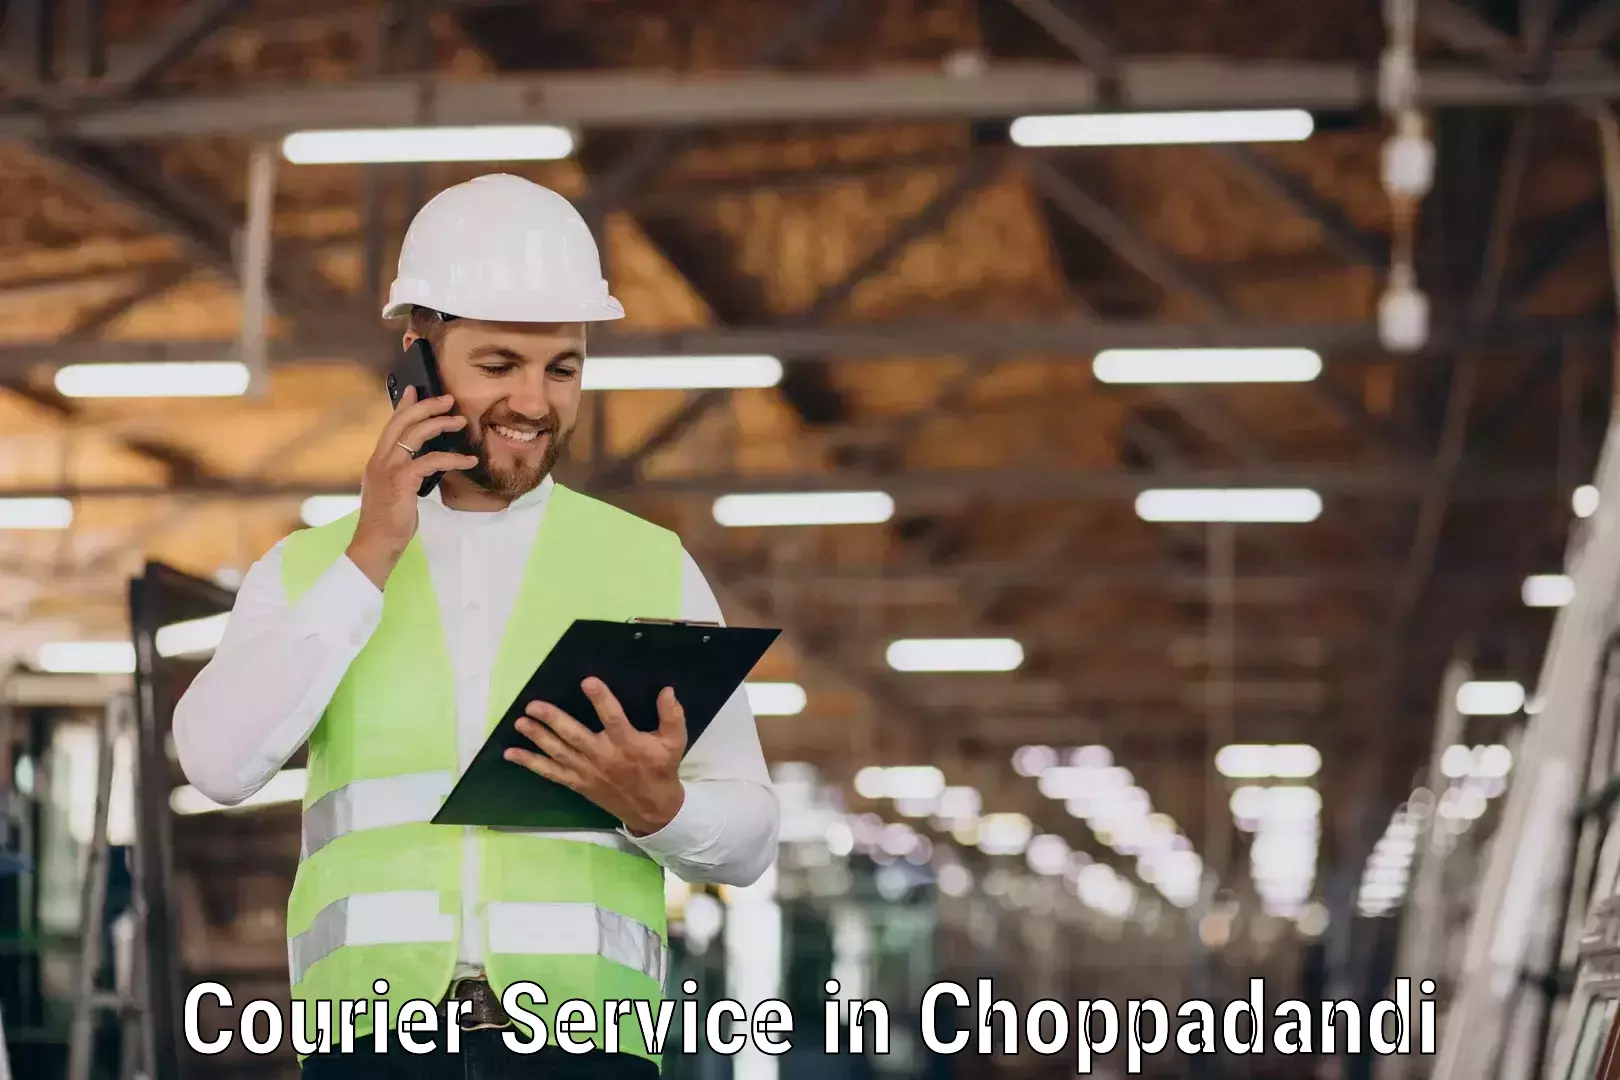 Personalized courier experiences in Choppadandi